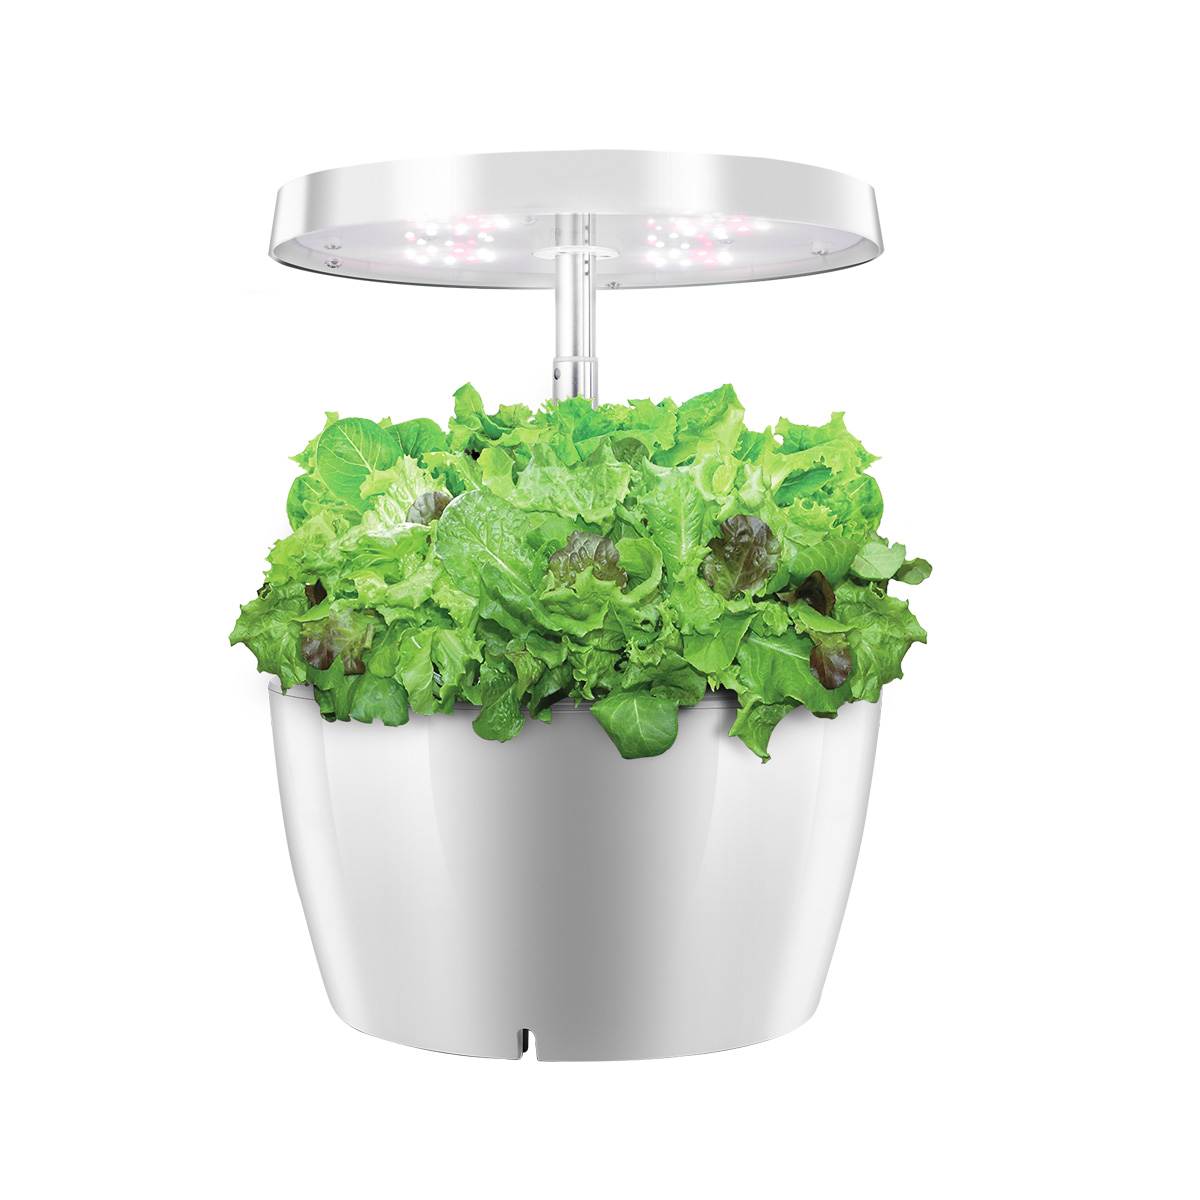 IGS-01-Indoor-Plant-Hydroponics-Grow-light-Soilless-Cultivation-Plant-Grow-Light-Lamp-For-Plant-Indo-1576311-5